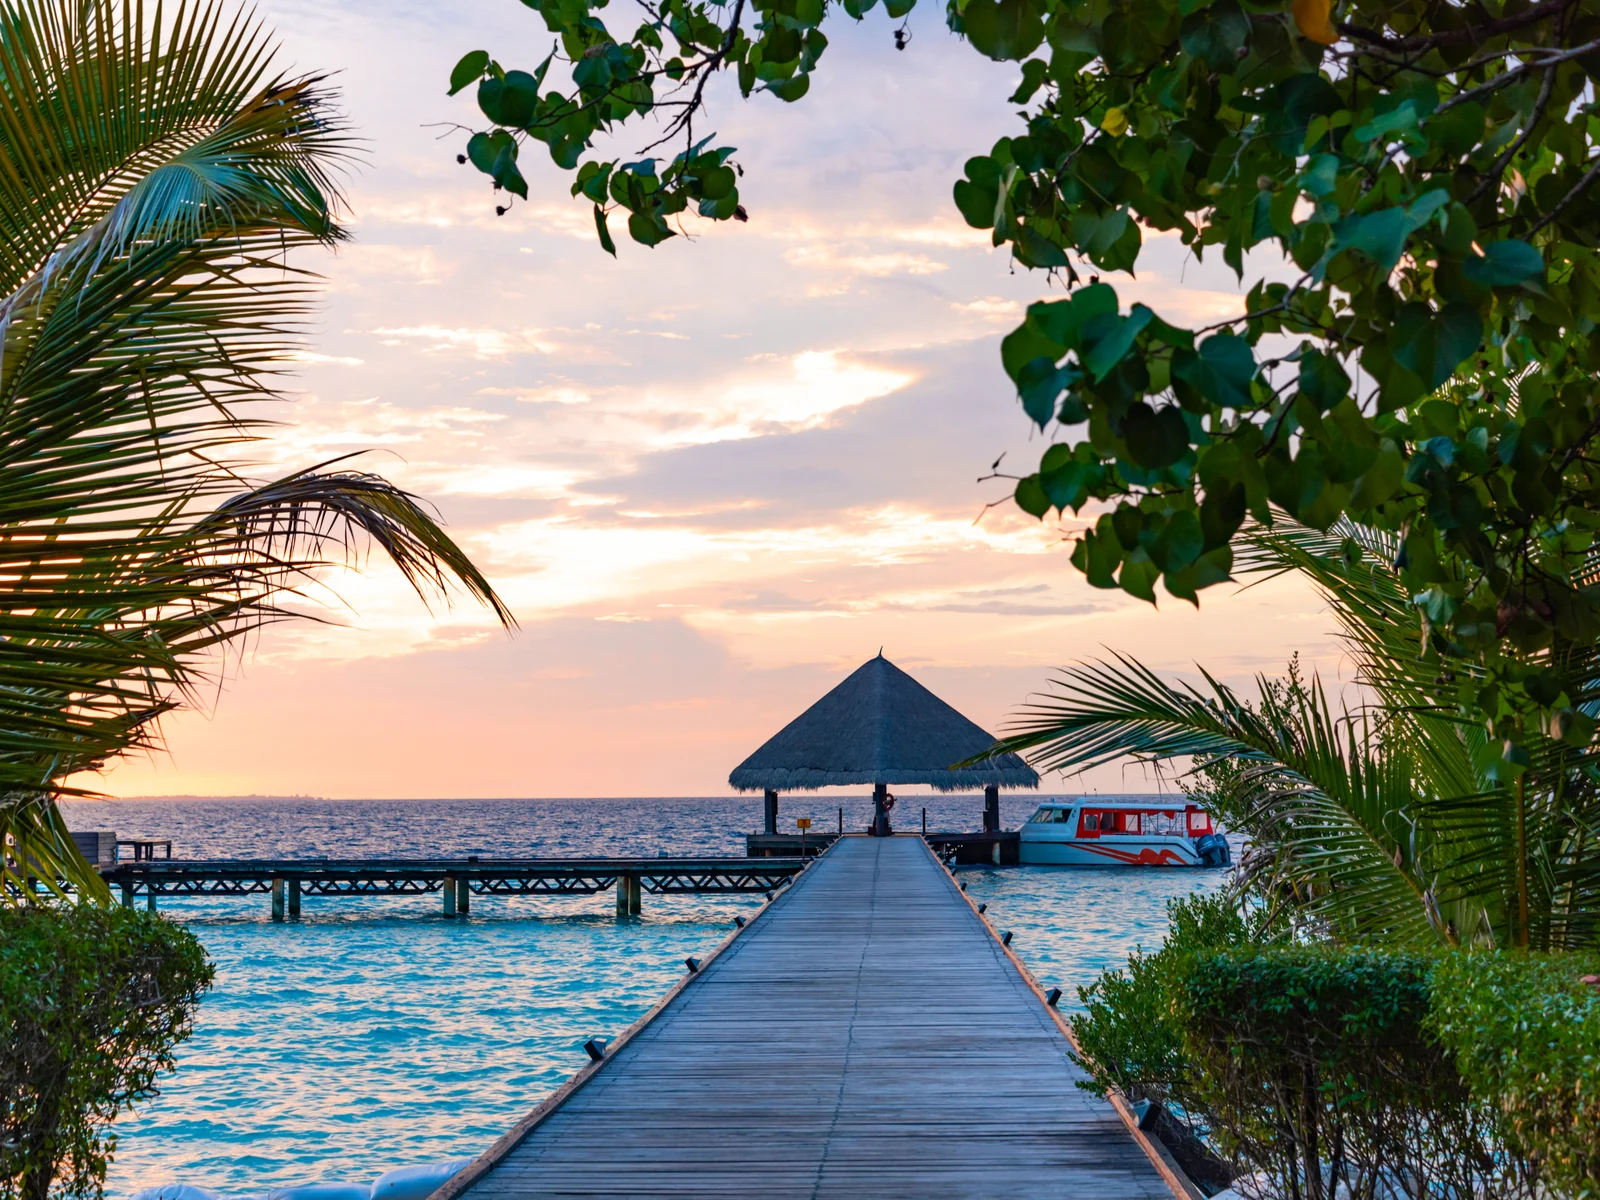 View of a dock and water from between trees during the overall best time to visit Maldives